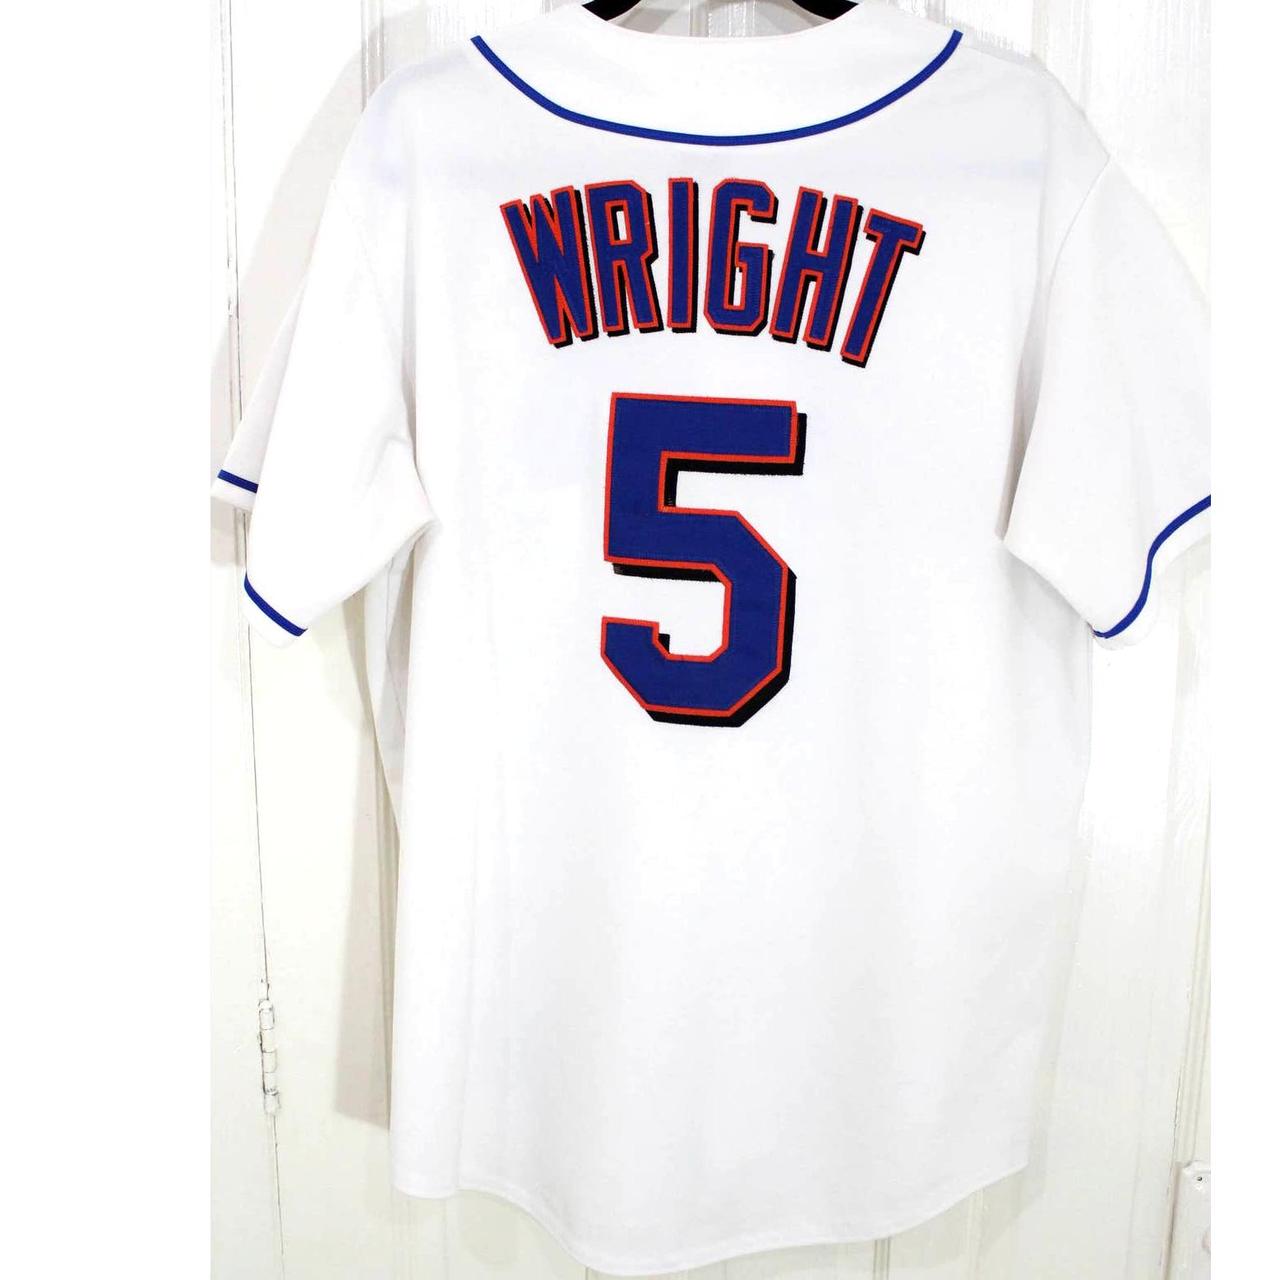 2006 David Wright New York Mets Majestic Authentic MLB Jersey Size